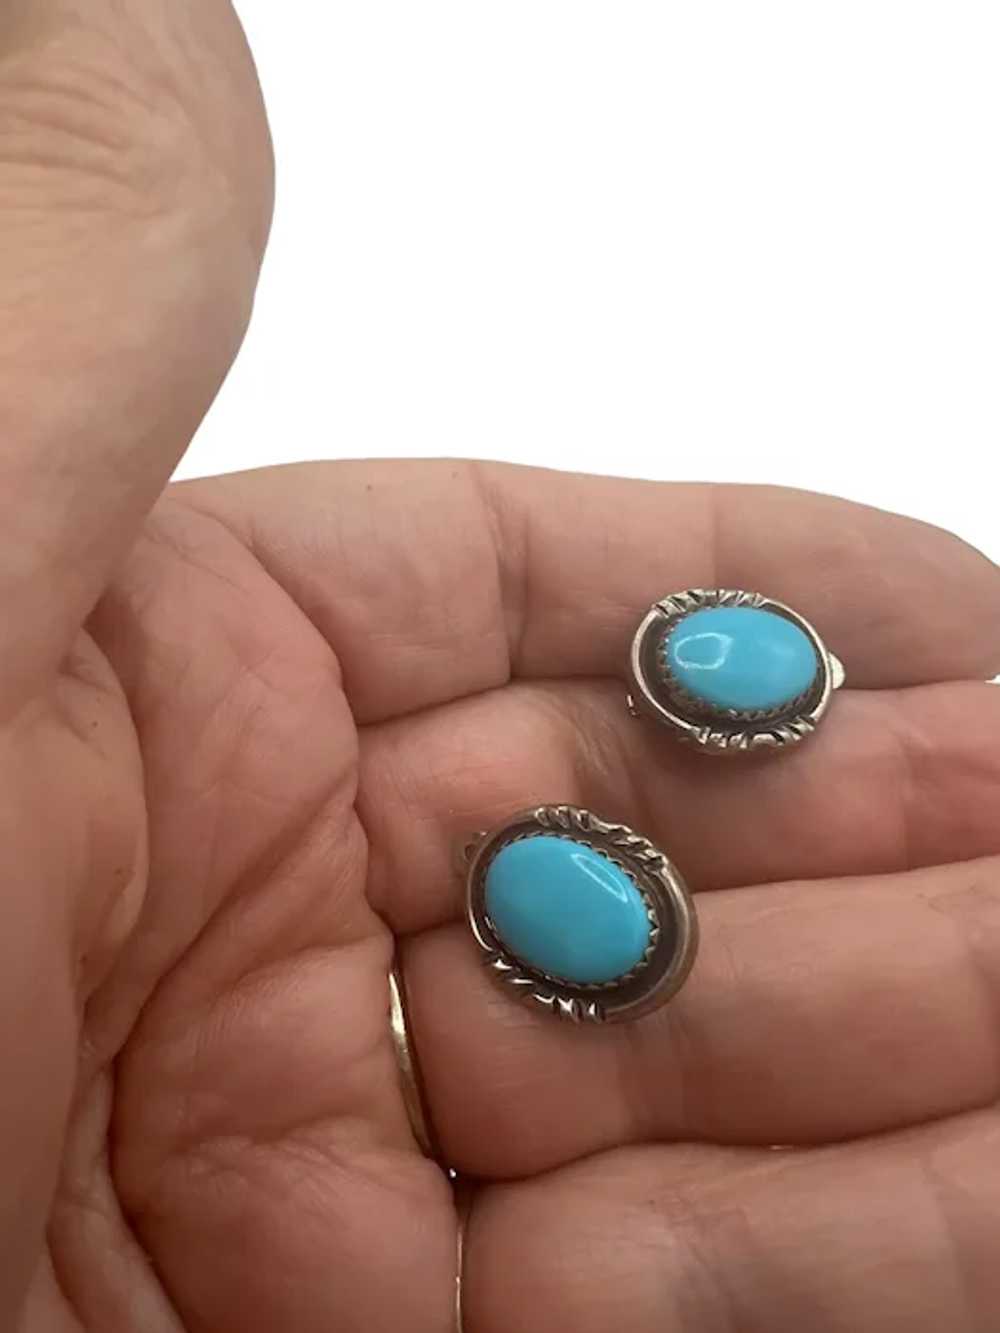 Vintage Sterling Silver Turquoise Clip Earrings - image 2